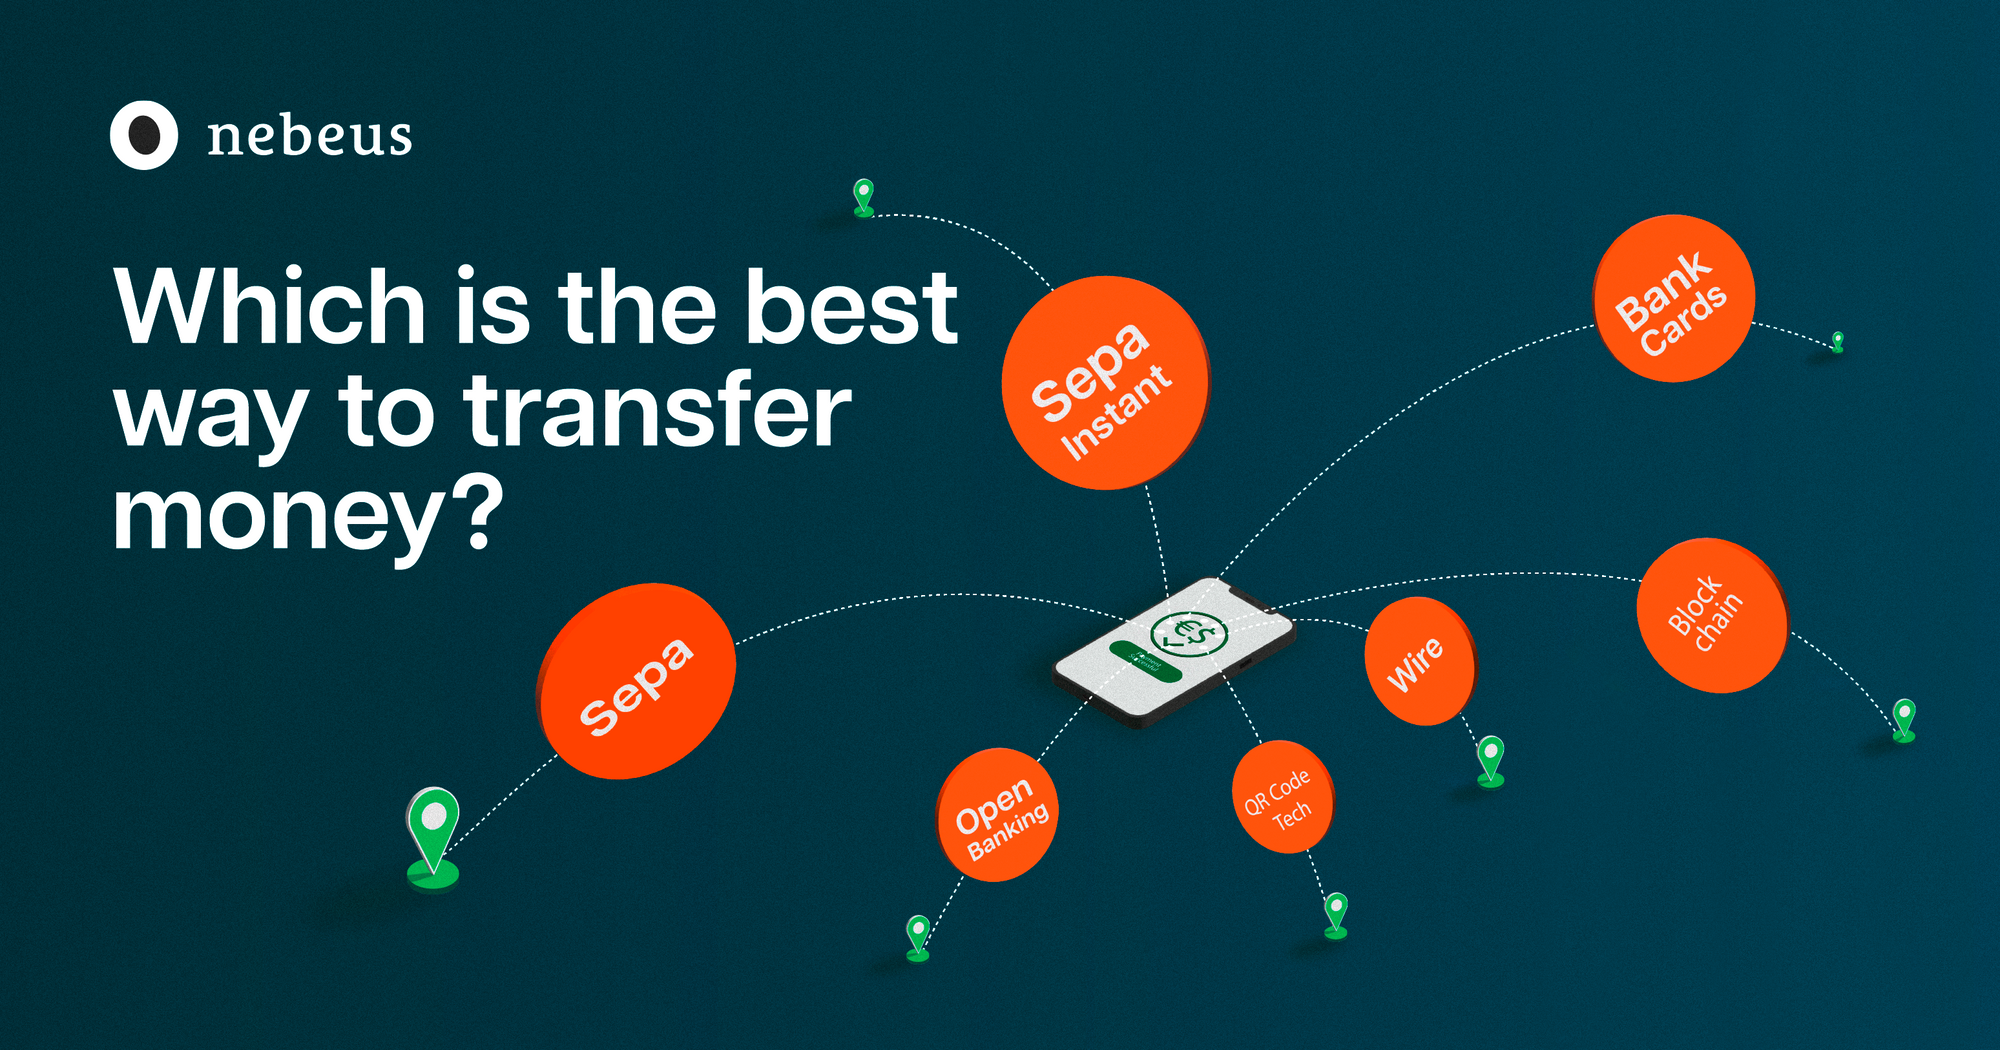 7 Ways to Transfer Money: How to Send Money Quickly?